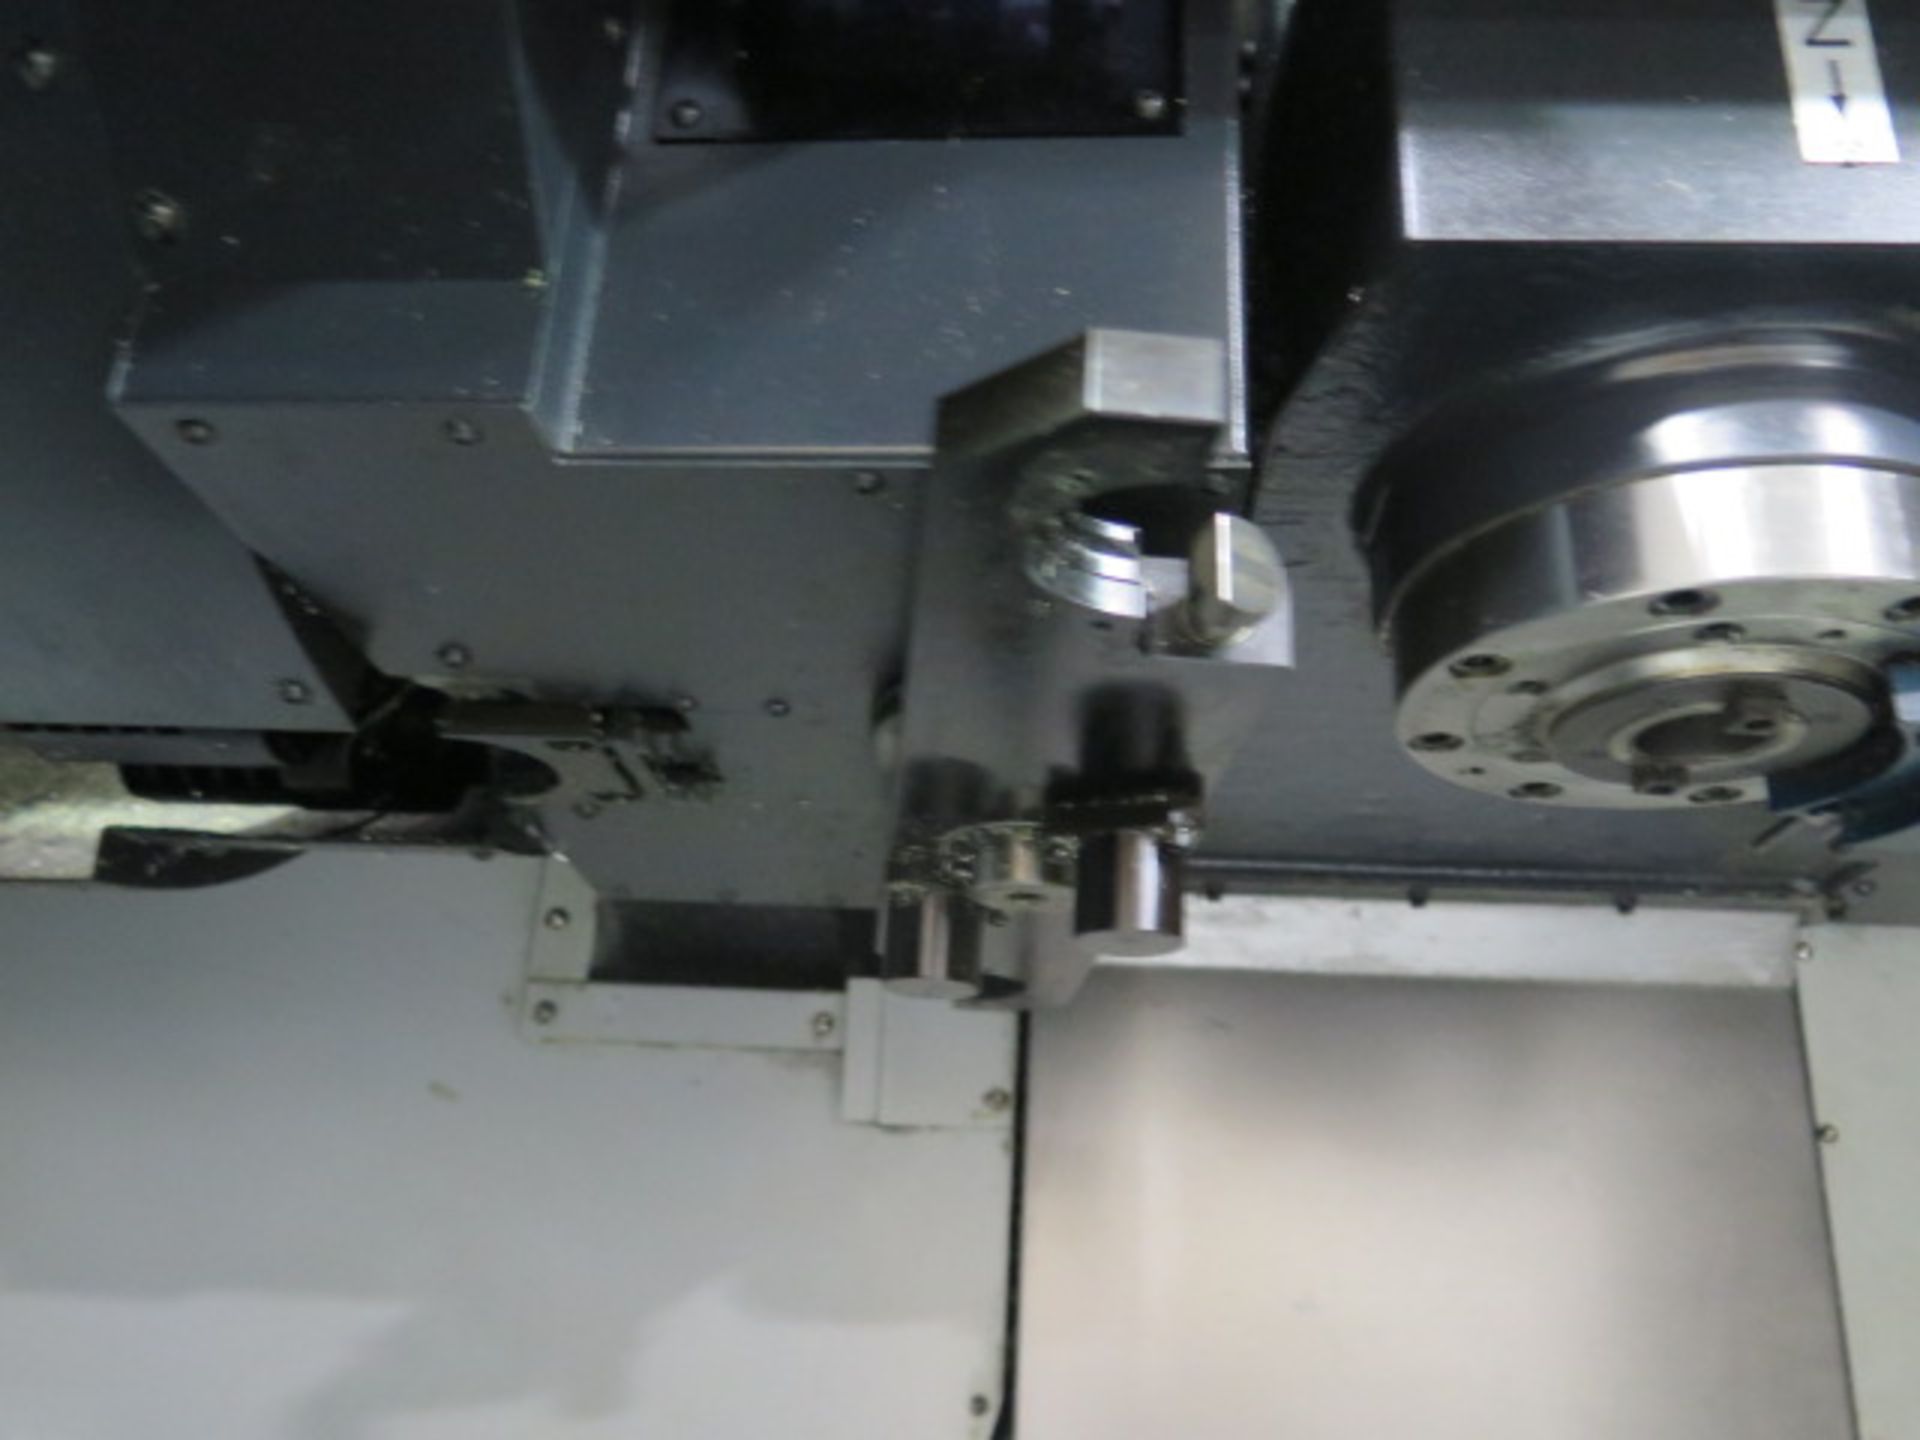 2015 Doosan DNM400 II 5-Axis Capable CNC Vertical Machining Center s/n MV0009-00343, SOLD AS IS - Image 6 of 22